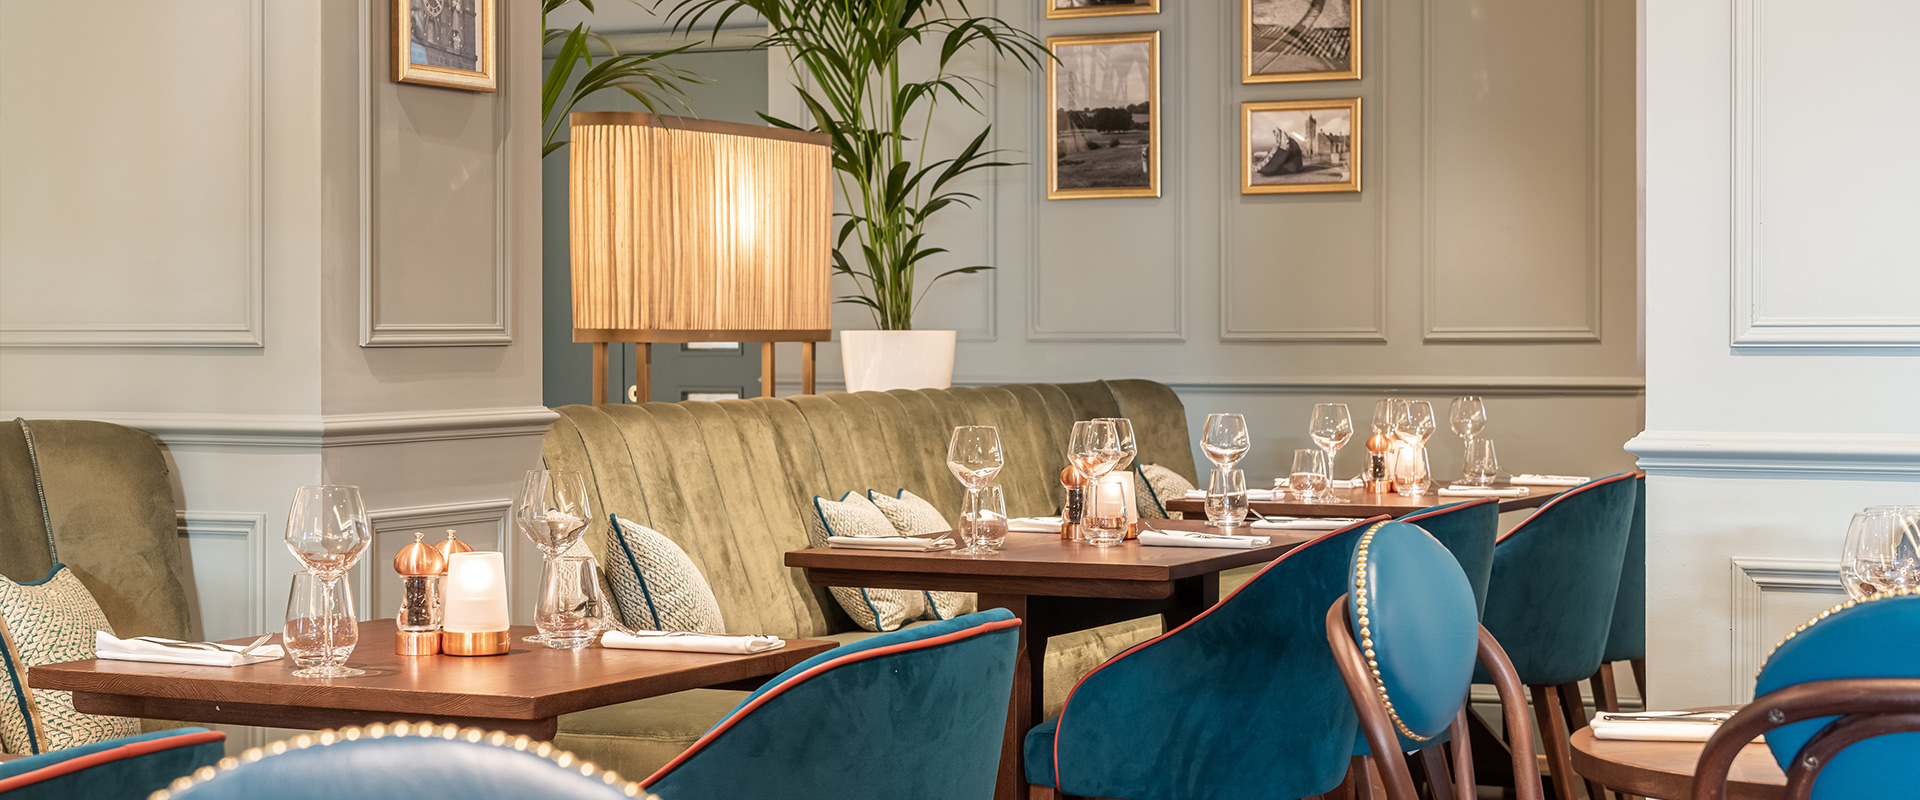 Luxuria Lifestyle's Beth Davies reviews the new Browns Brasserie & Bar in Cardiff